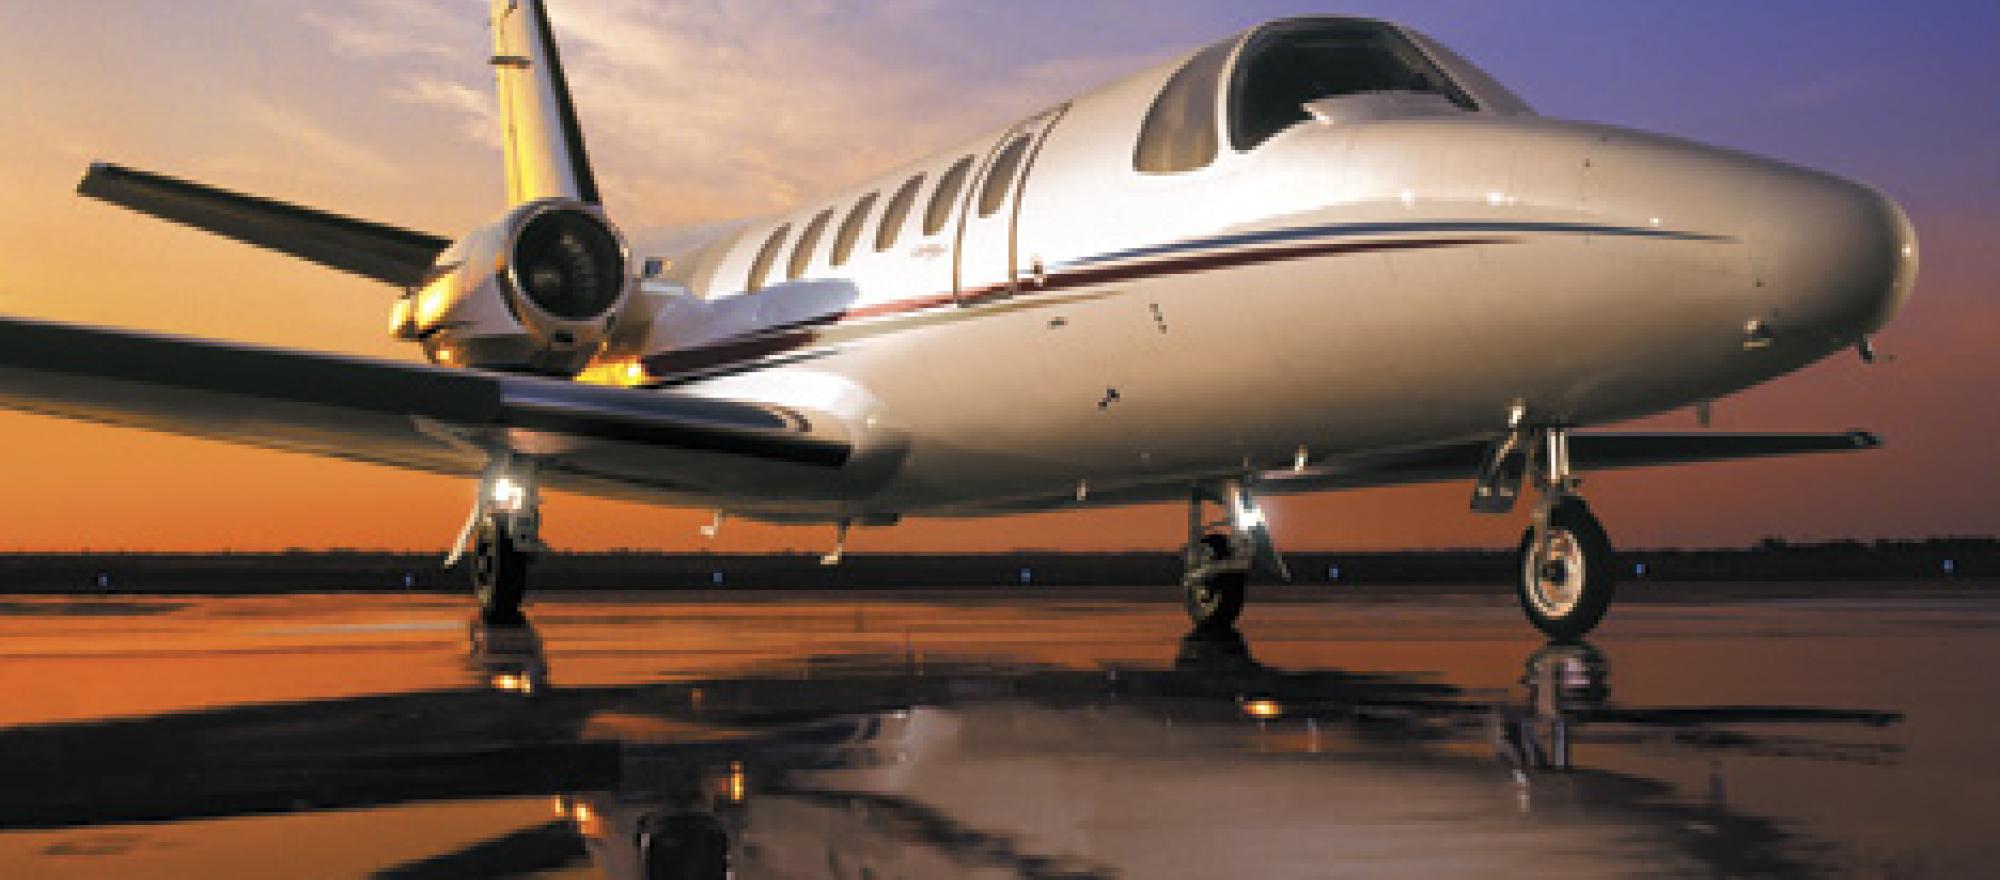 A citation bravo costs far less to operate than a global 5000, a potential pr